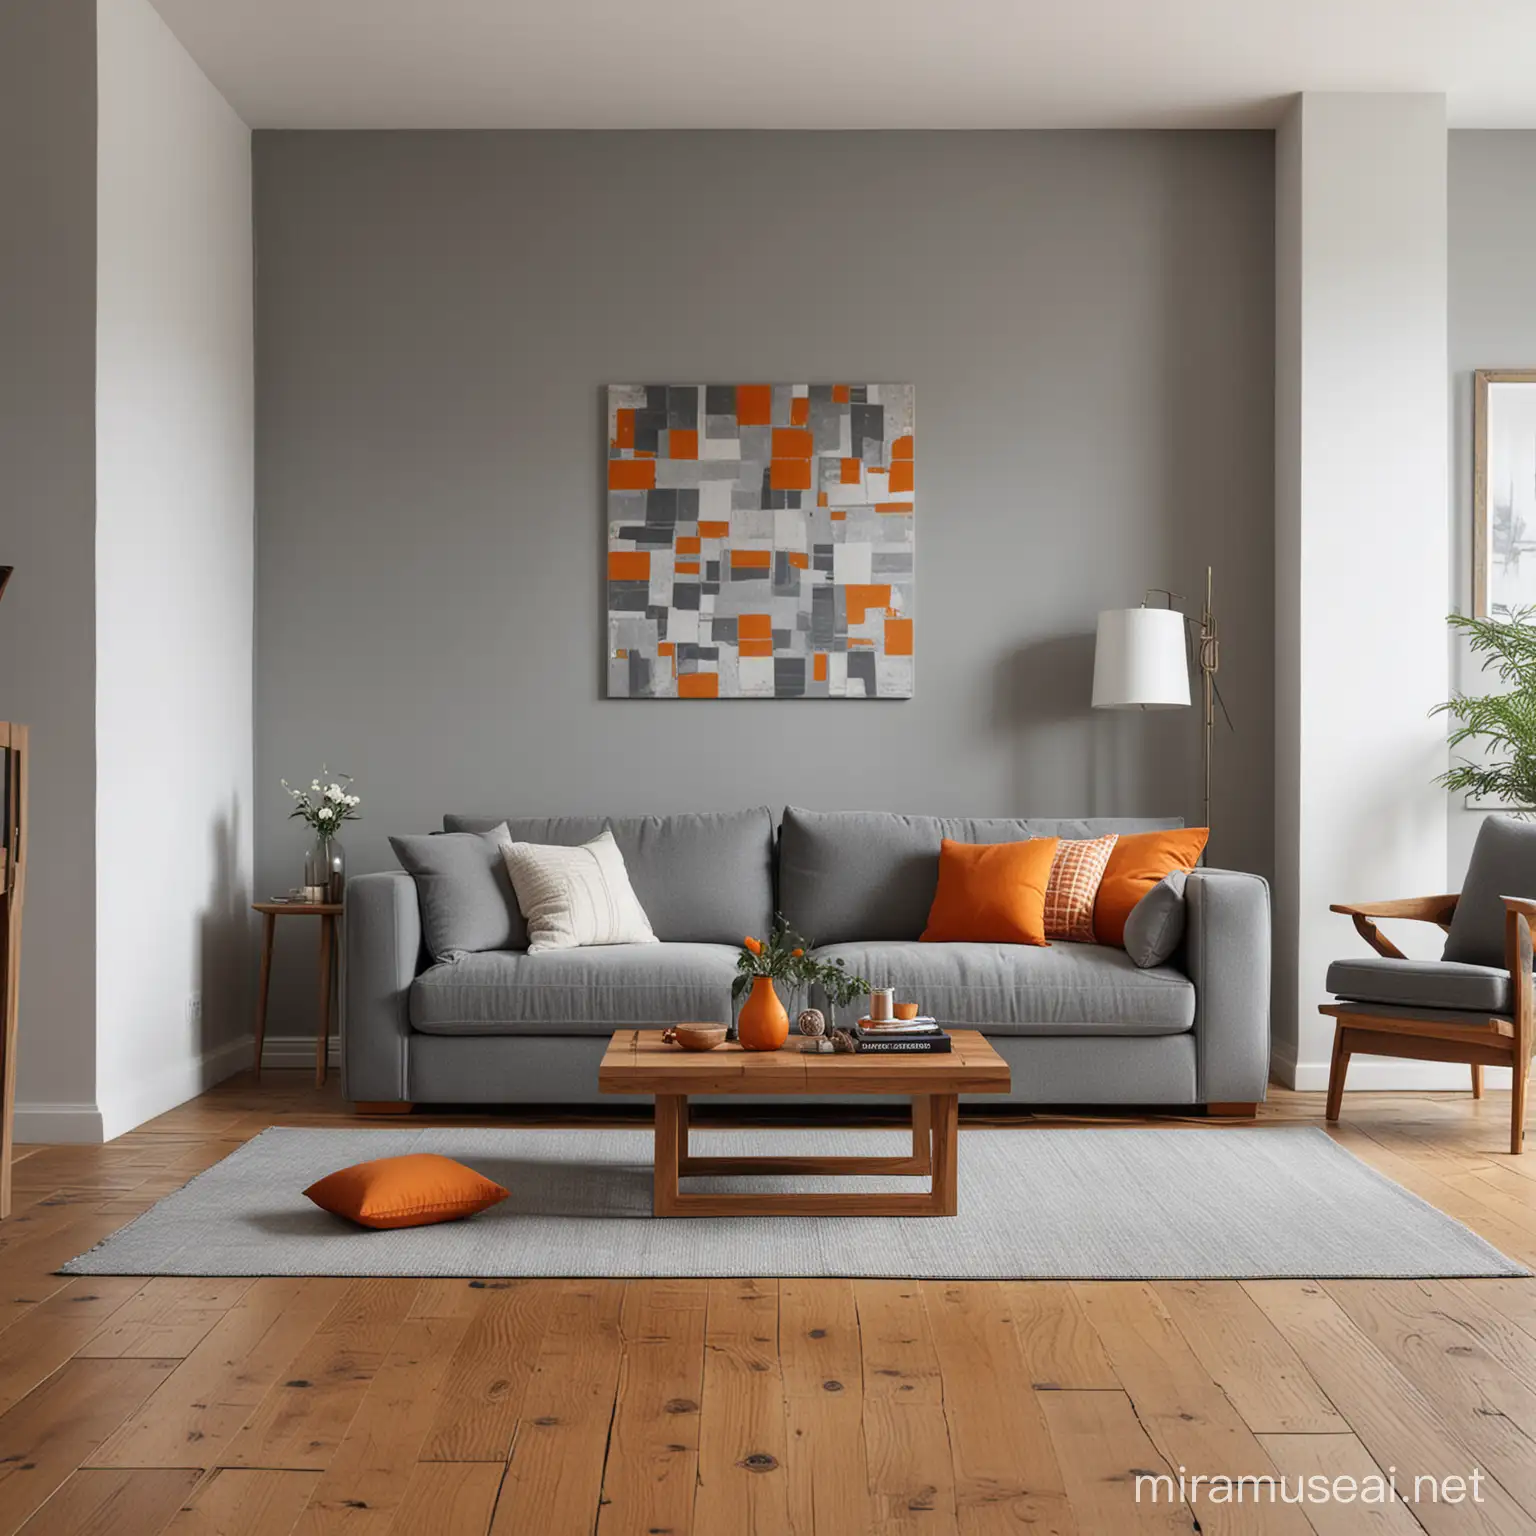 A living room in gray and orange. Behind the sofa hangs a square work, wooden floor, detailed, lively, light and shadow